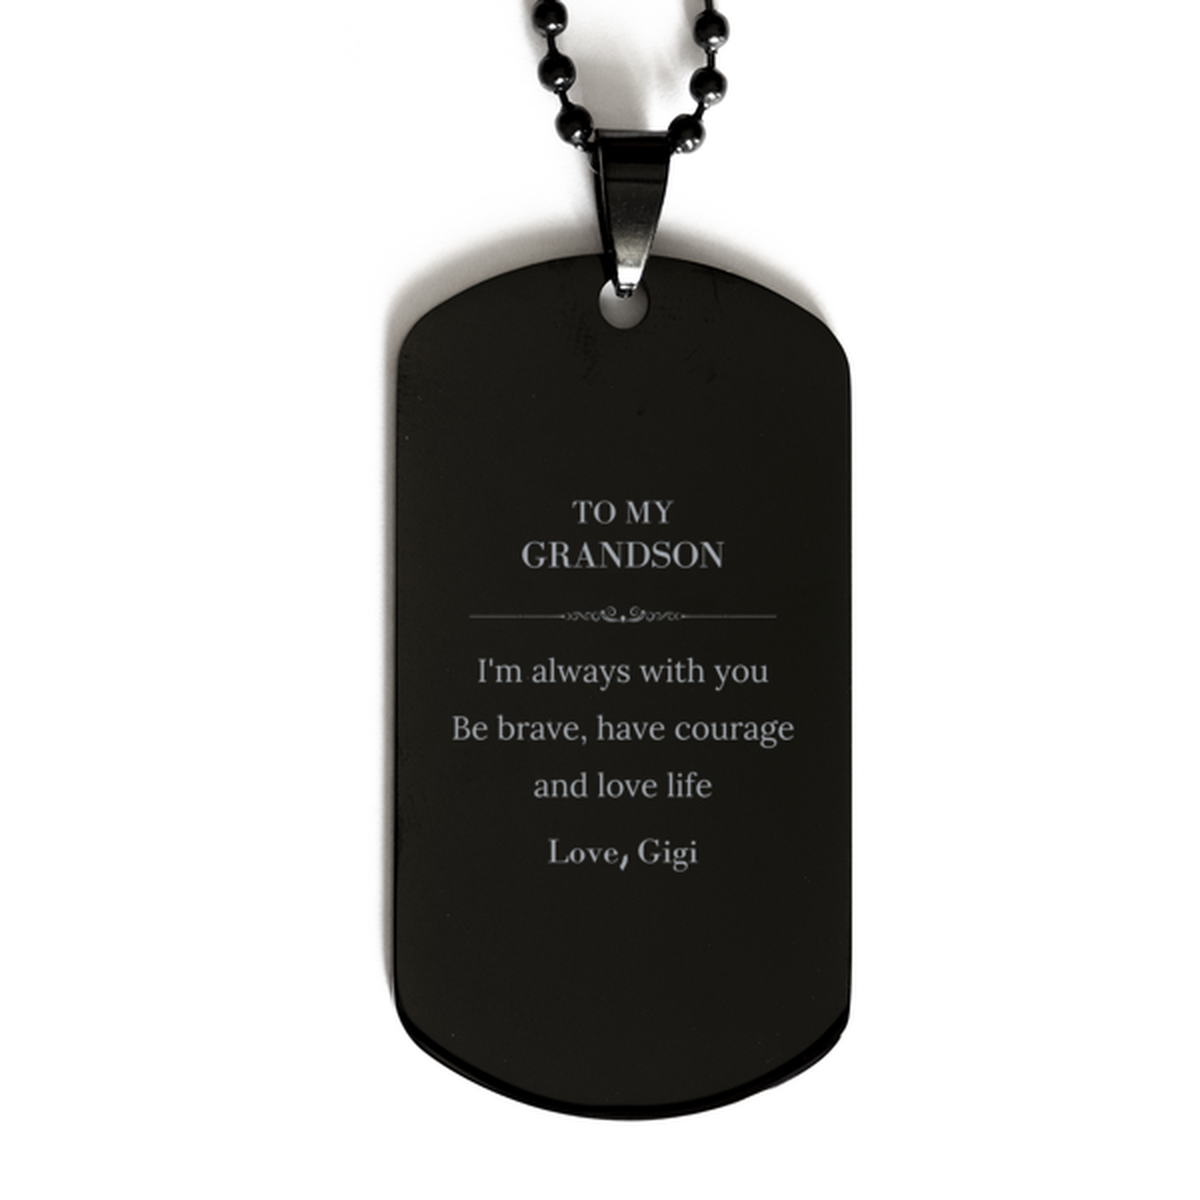 To My Grandson Gifts from Gigi, Unique Black Dog Tag Inspirational Christmas Birthday Graduation Gifts for Grandson I'm always with you. Be brave, have courage and love life. Love, Gigi